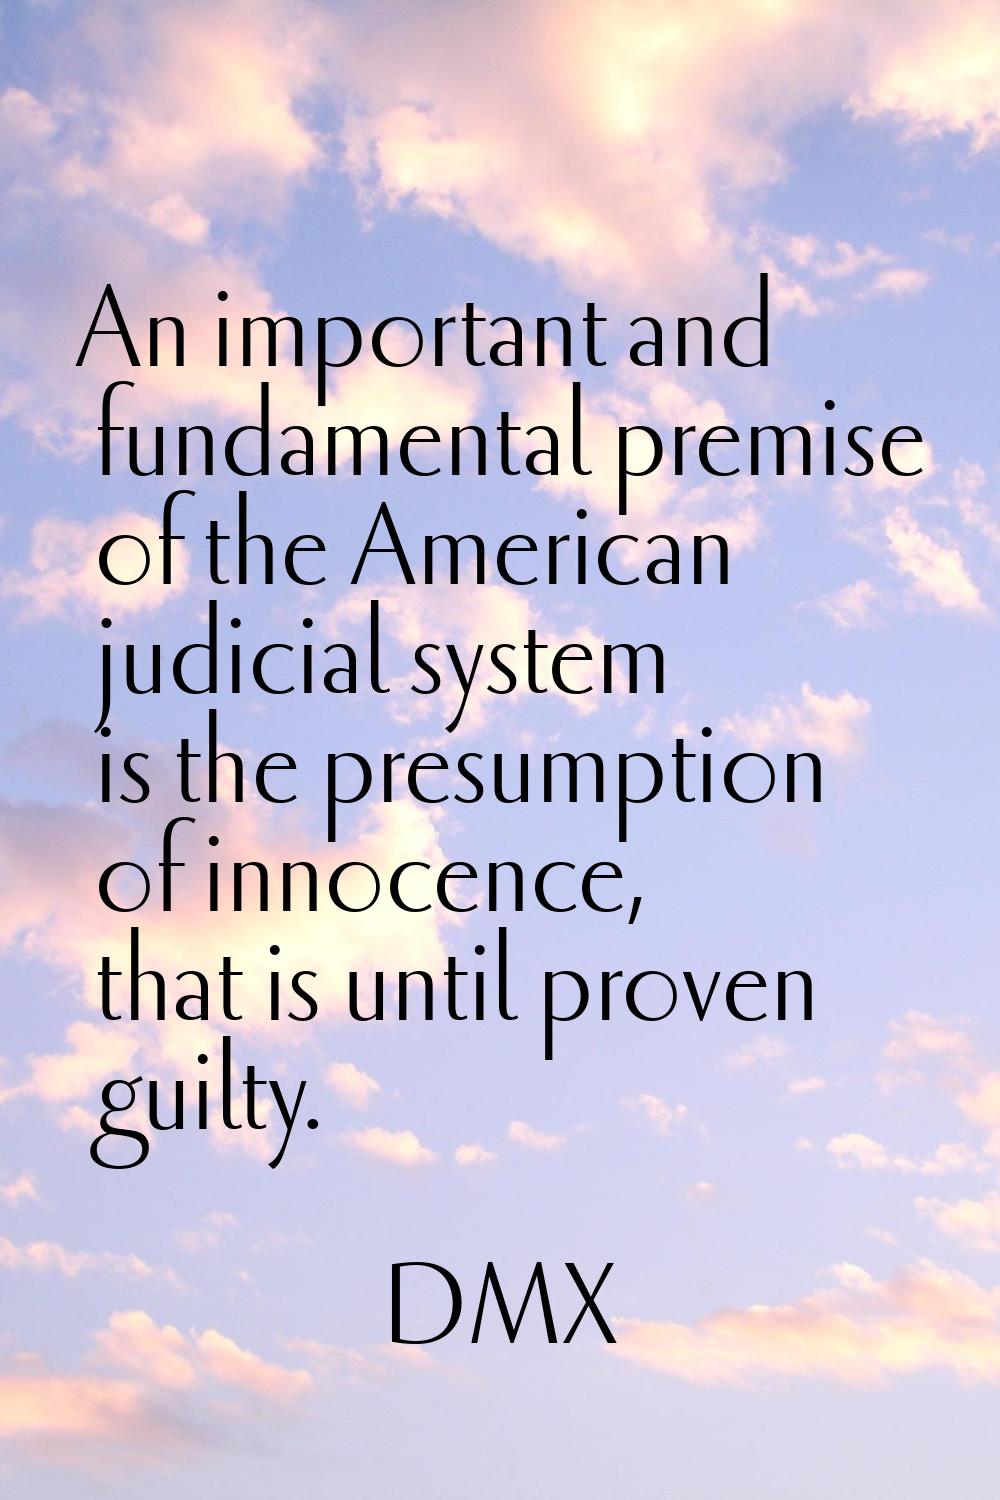 An important and fundamental premise of the American judicial system is the presumption of innocenc